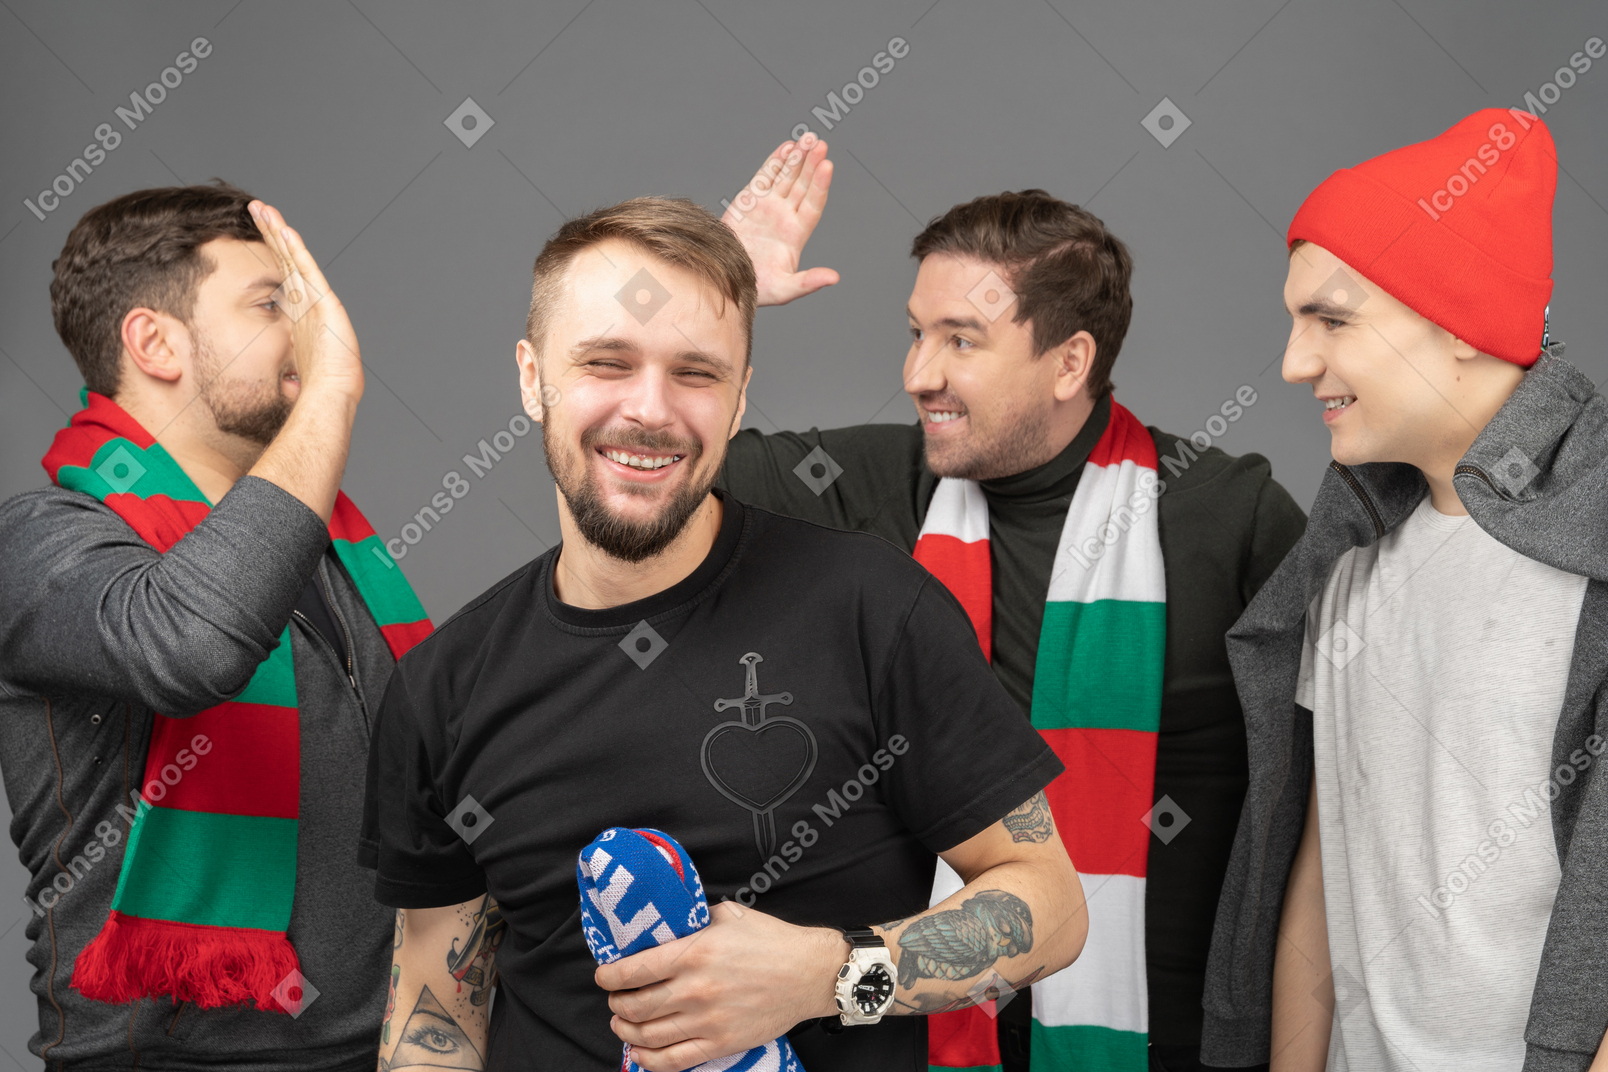 Close-up of four male football fans celebrating the victory